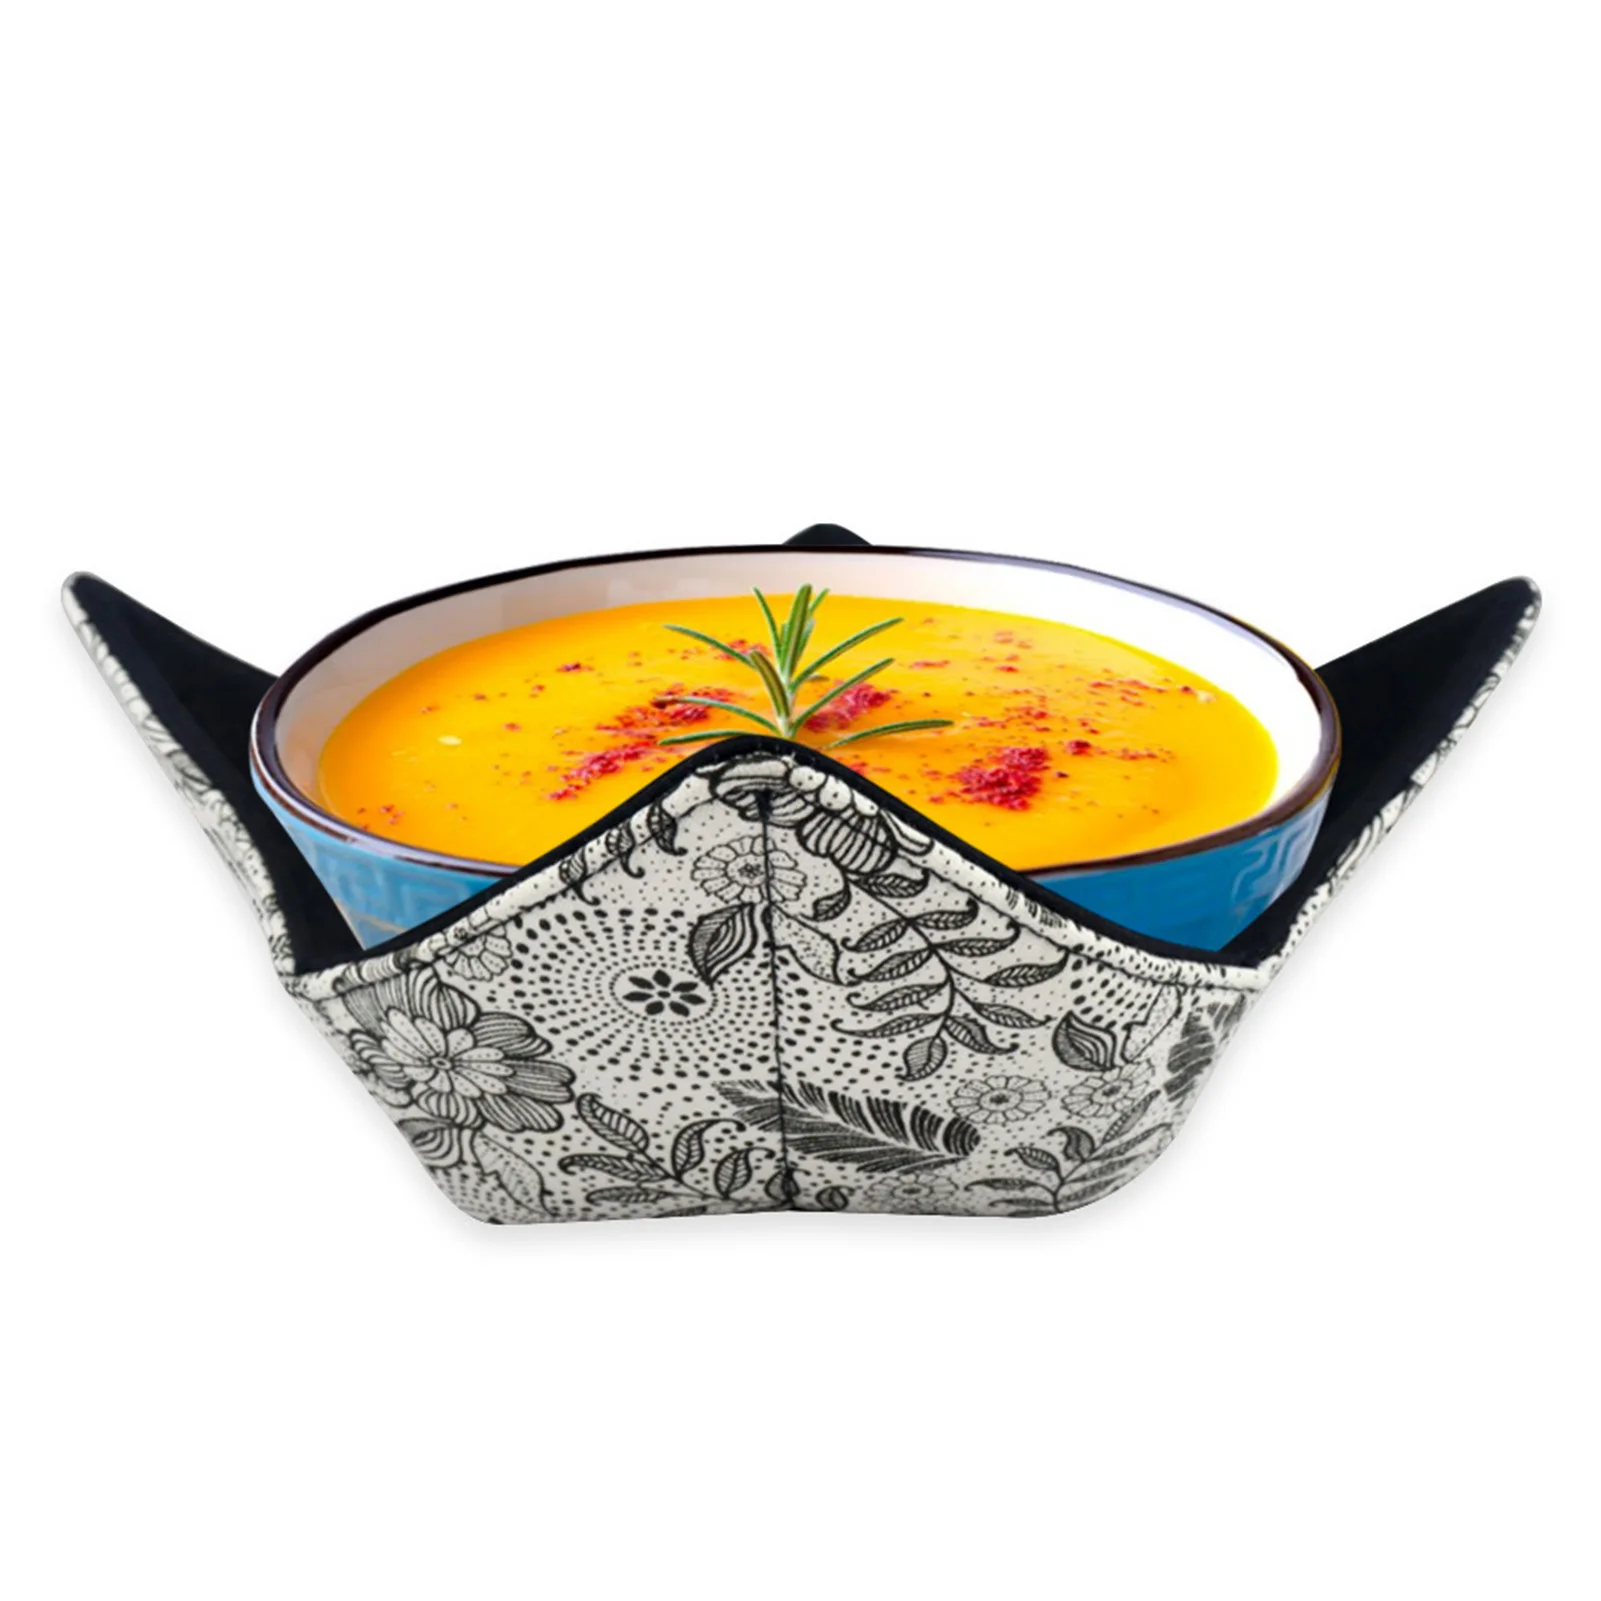 

Bowl Cozy For Microwave Polyester & Sponge Safe Insulated Anti-Scalding Reusable Dish Holder Household Product For Kitchen